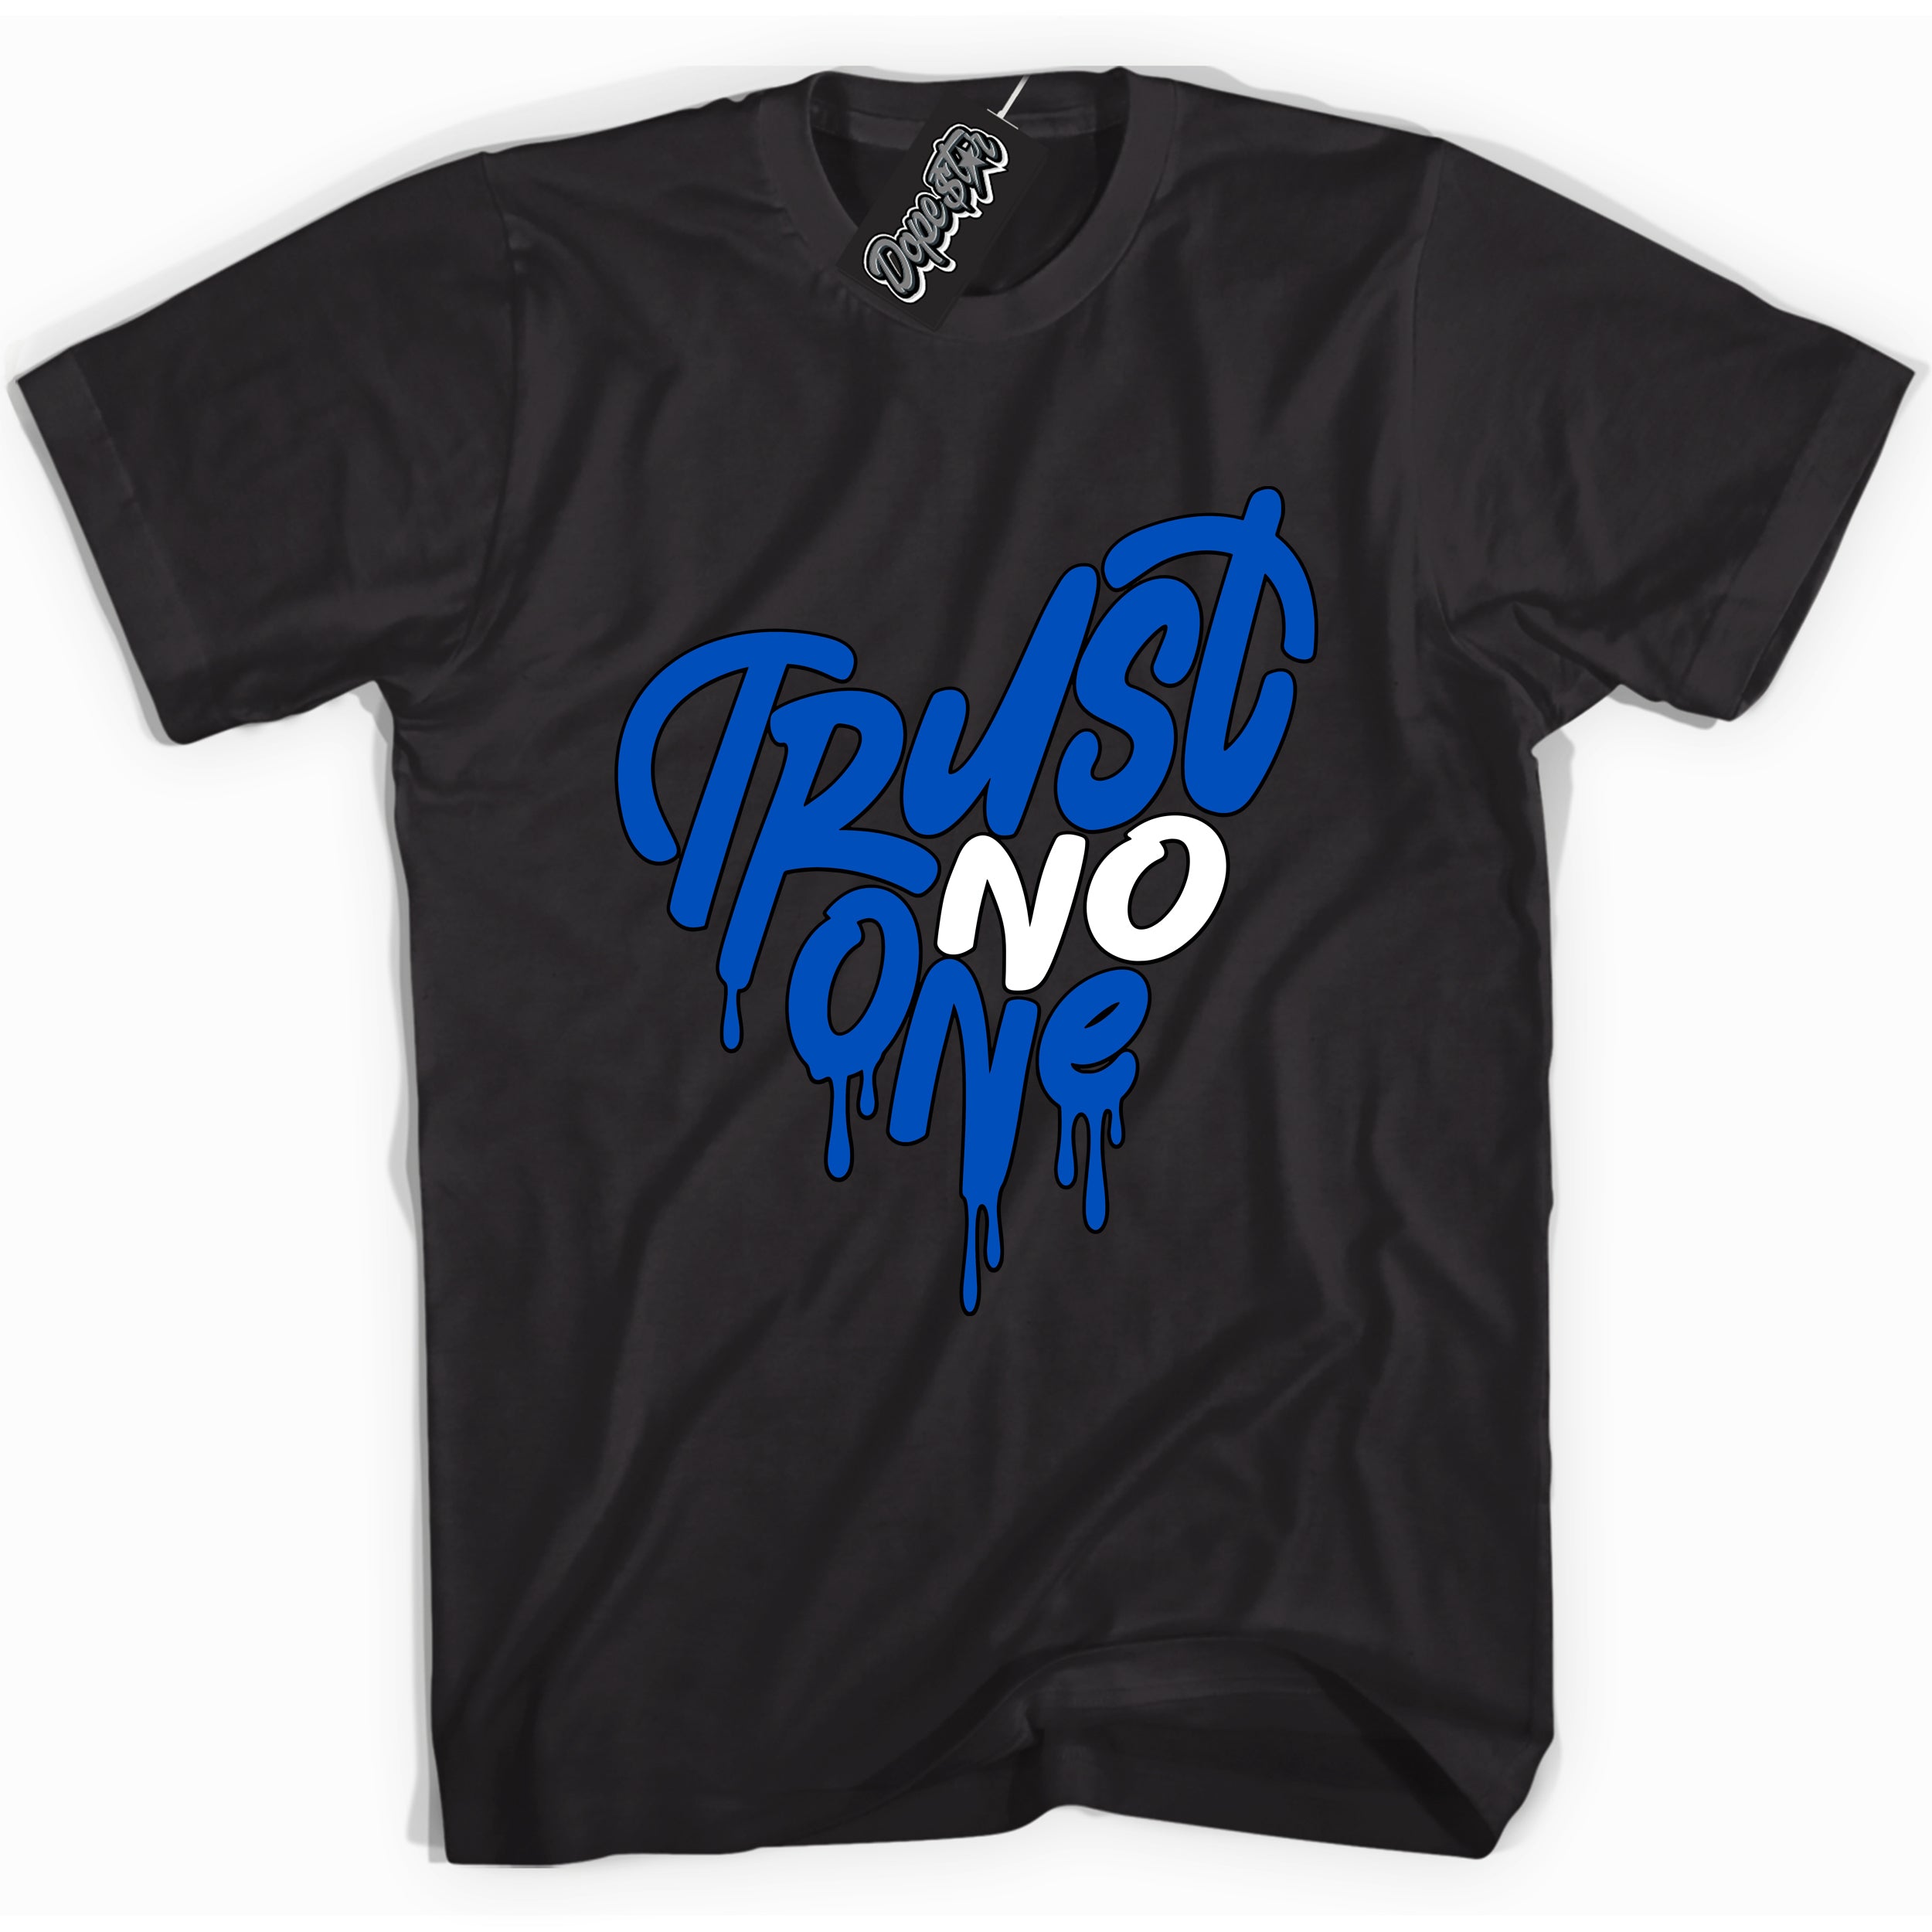 Cool Black graphic tee with "Trust No One Heart" design, that perfectly matches Royal Reimagined 1s sneakers 